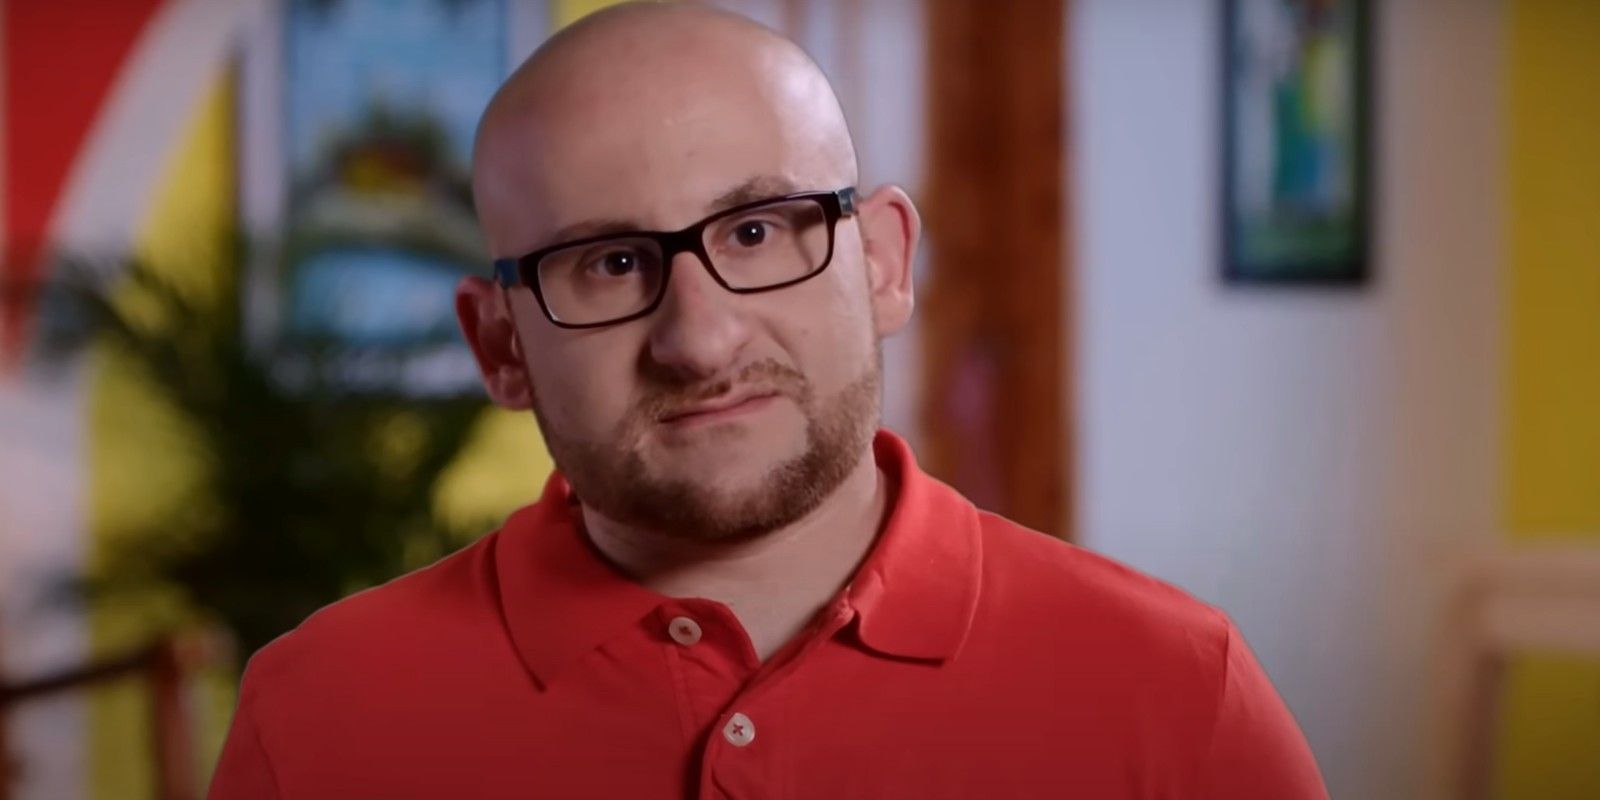 Mike Berk redshirted the 90-day fiance 